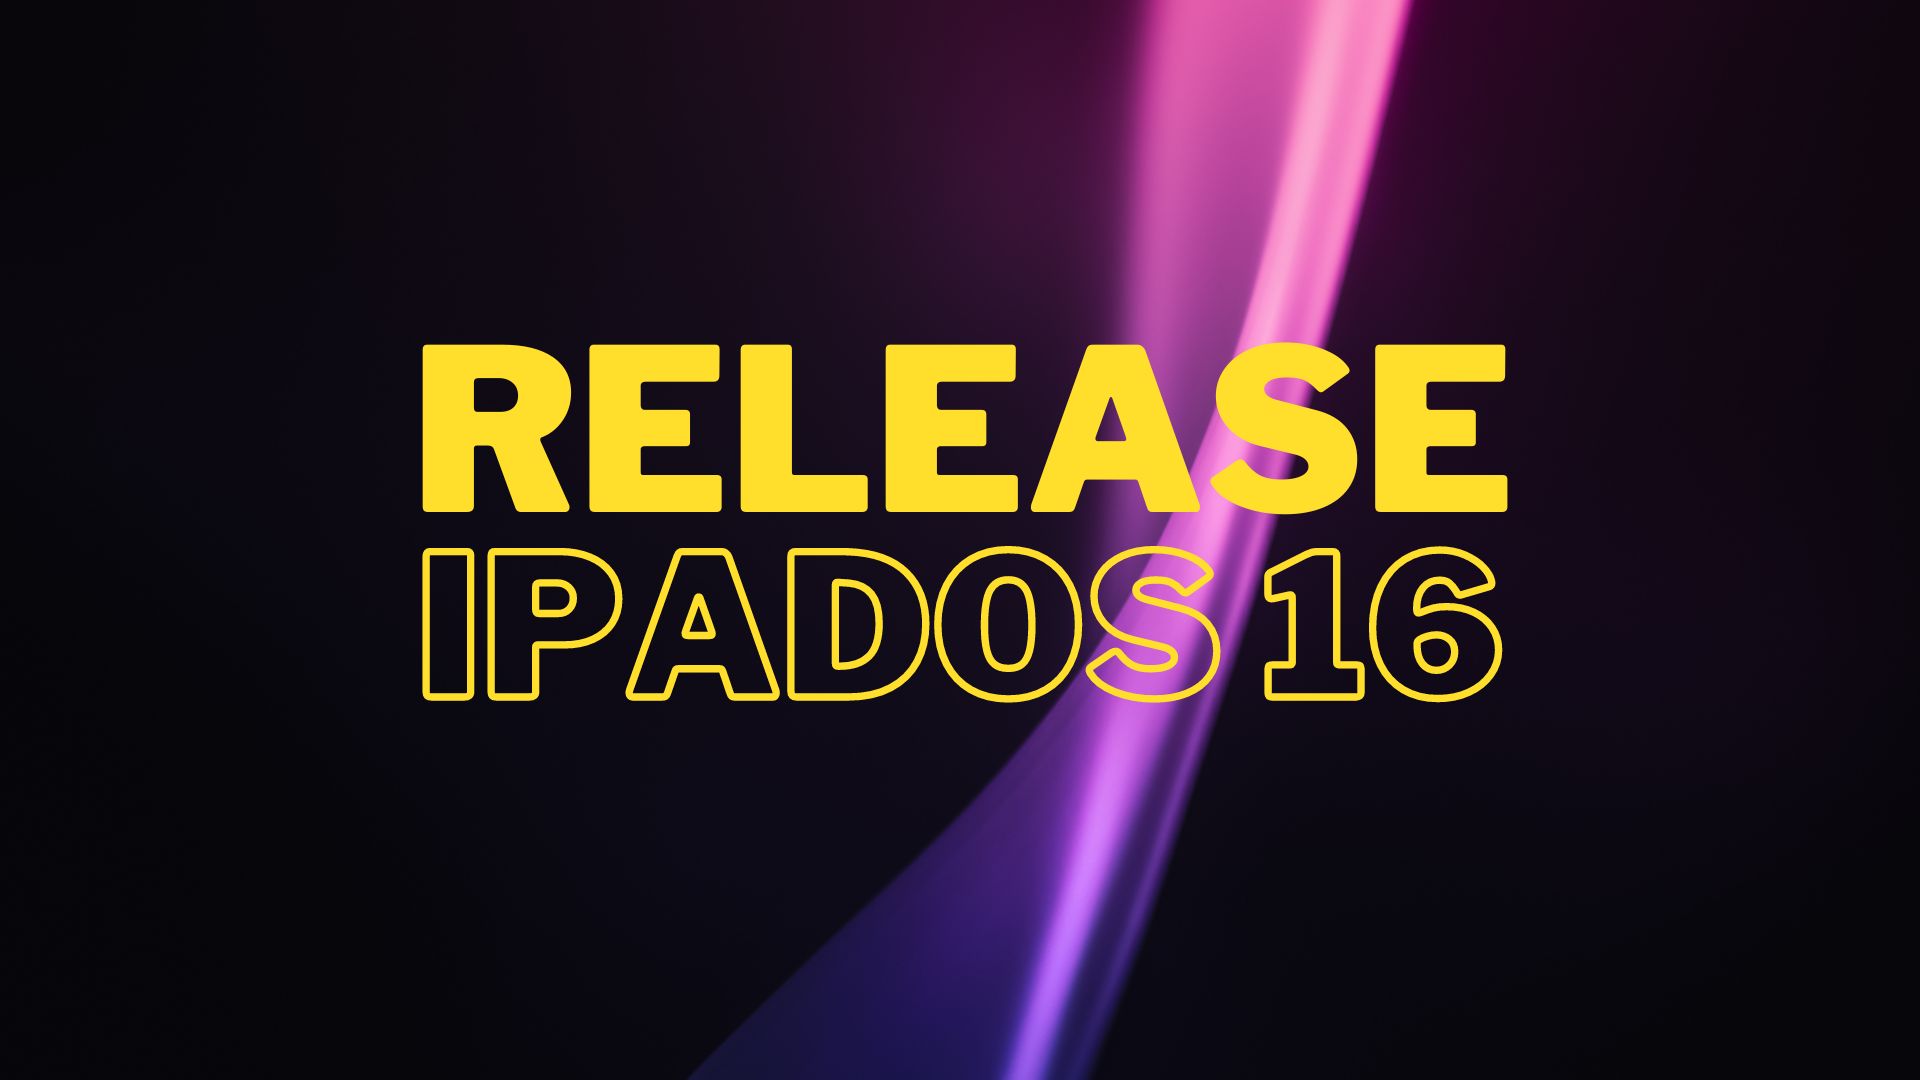 Issue #108: Apple should release iPadOS 16